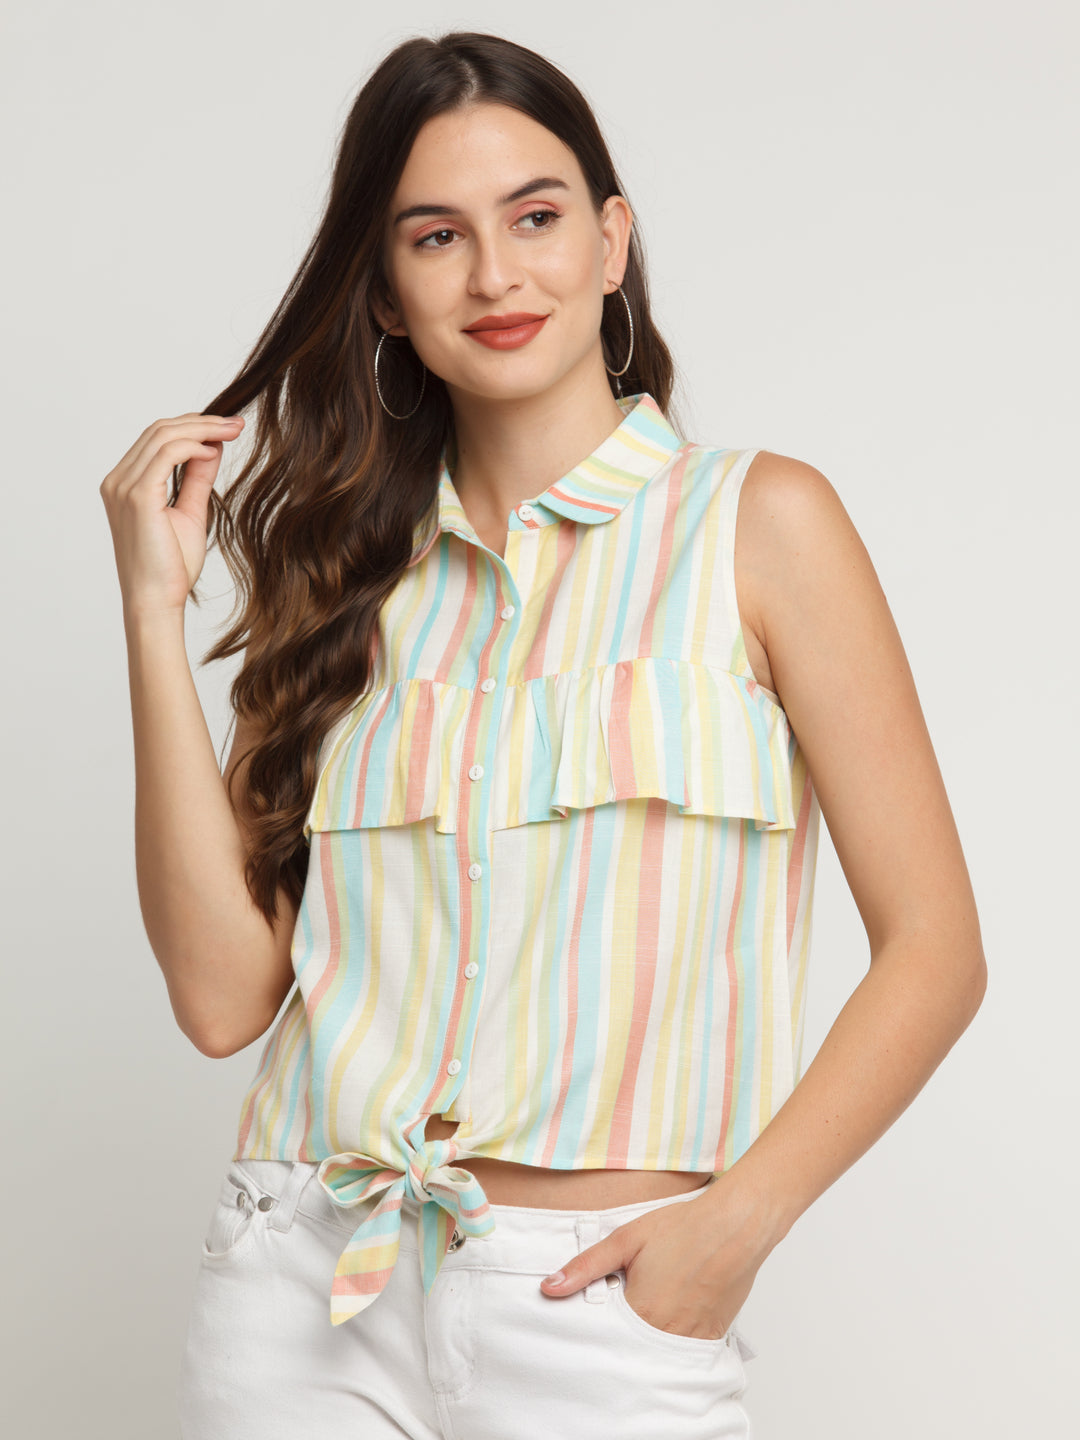 Multicolored Striped Ruffled Shirt For Women